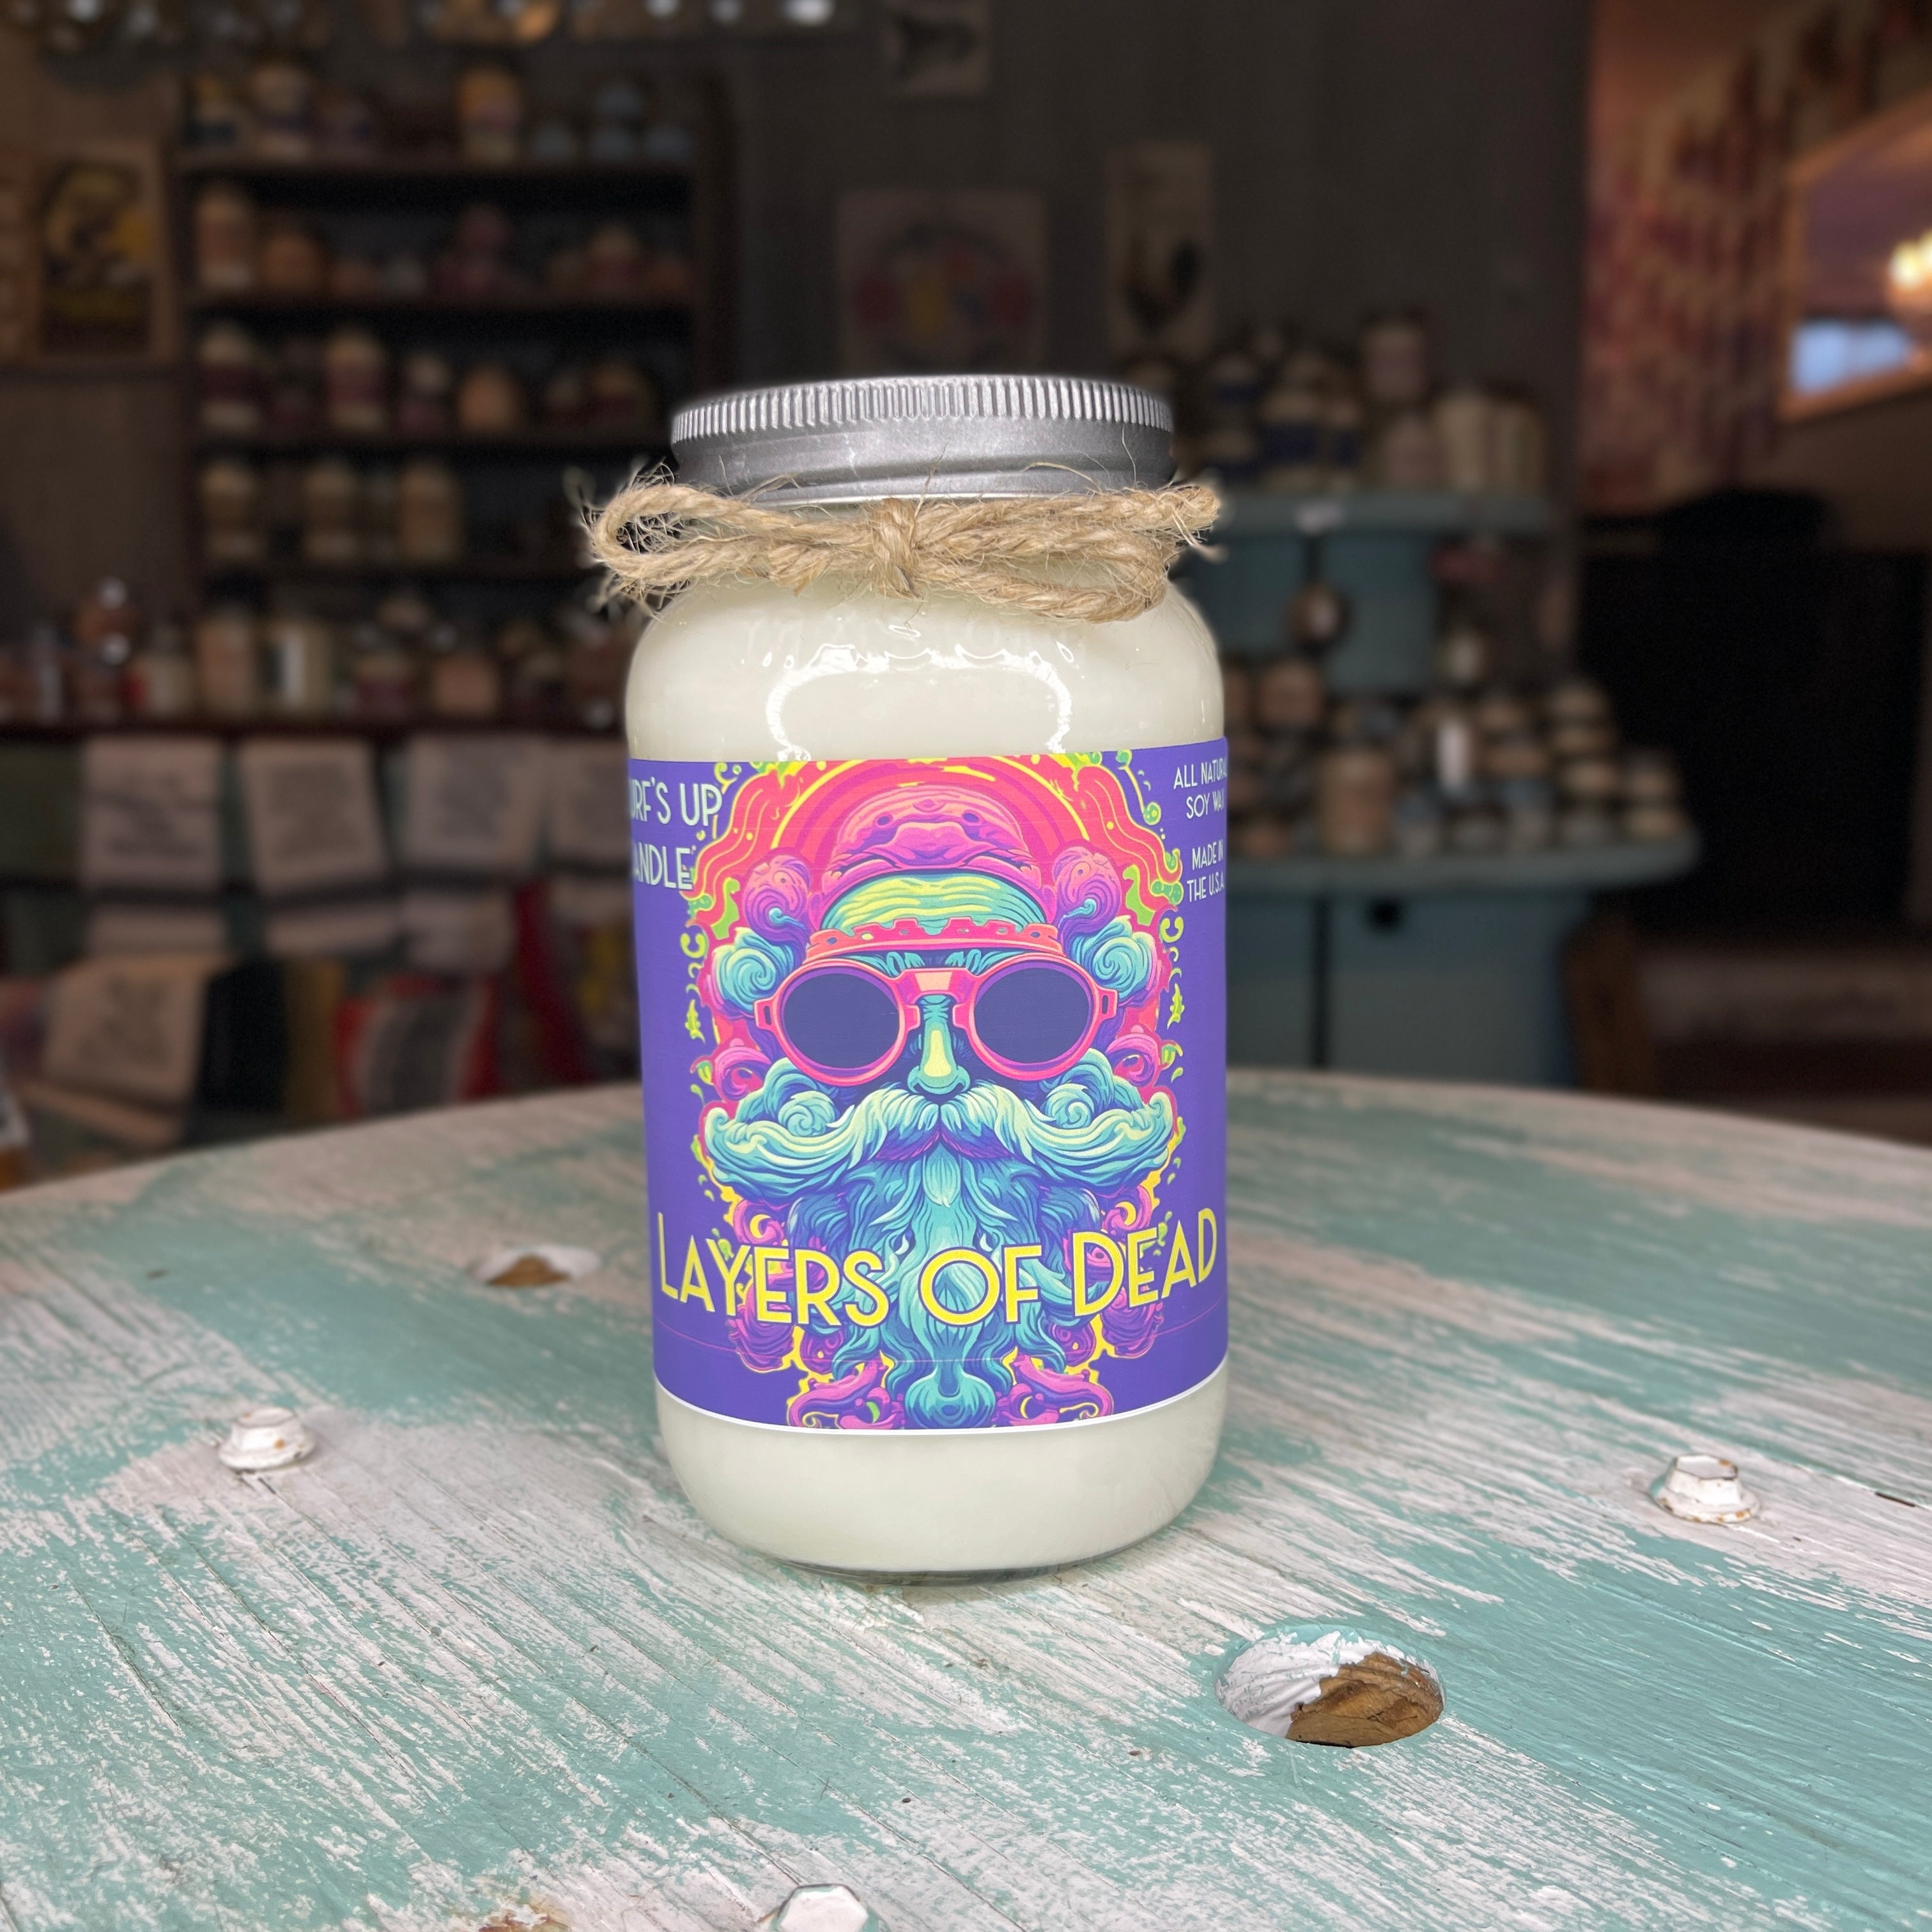 Layers of Dead Triple Layer Mason Jar Candle- Grateful Dead Inspired Collection